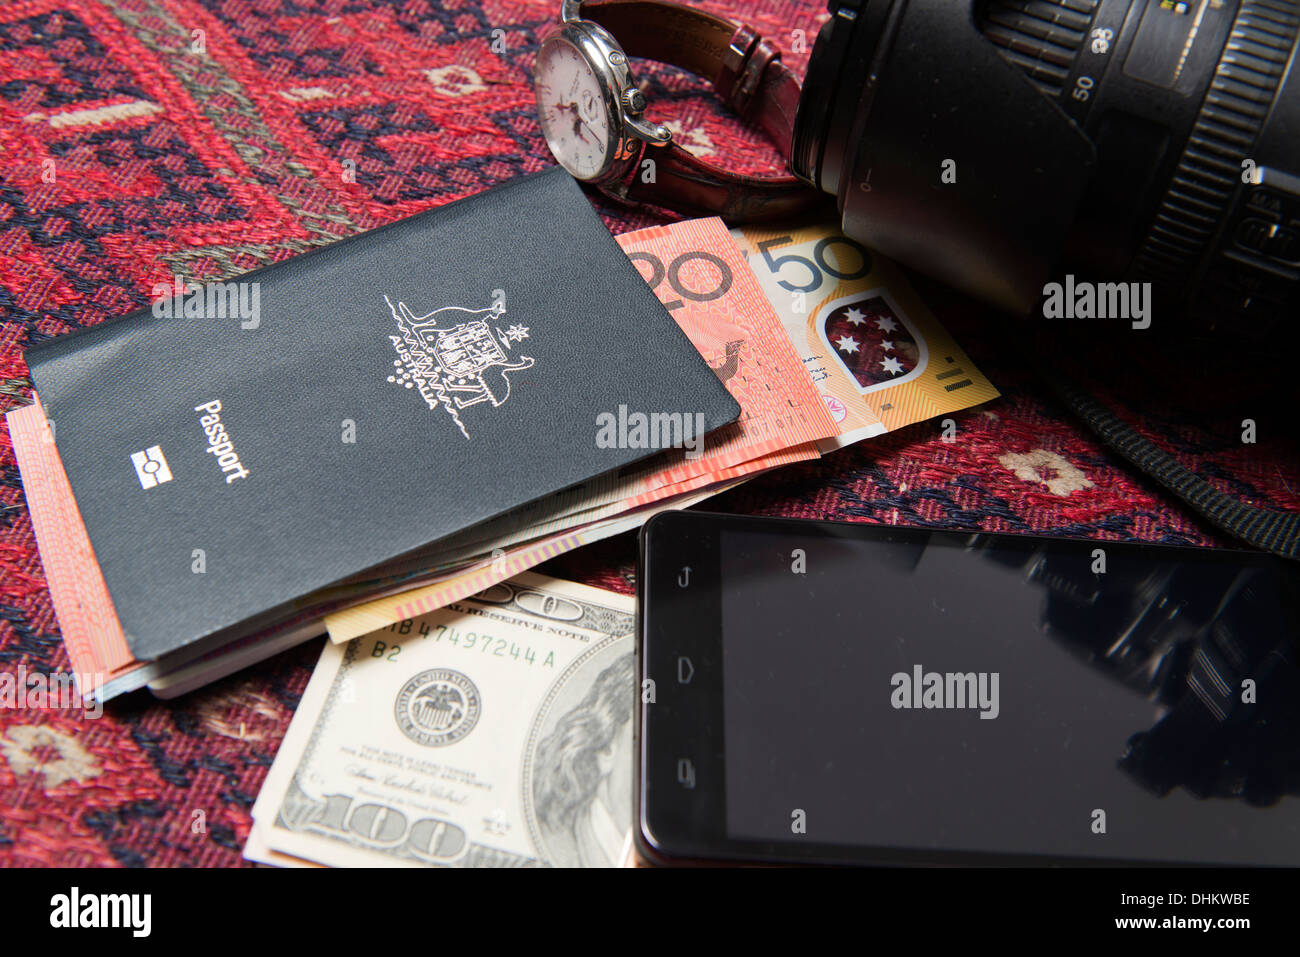 Essentials for travel brought together - passport, money, camera, mobile phone, watch. Stock Photo